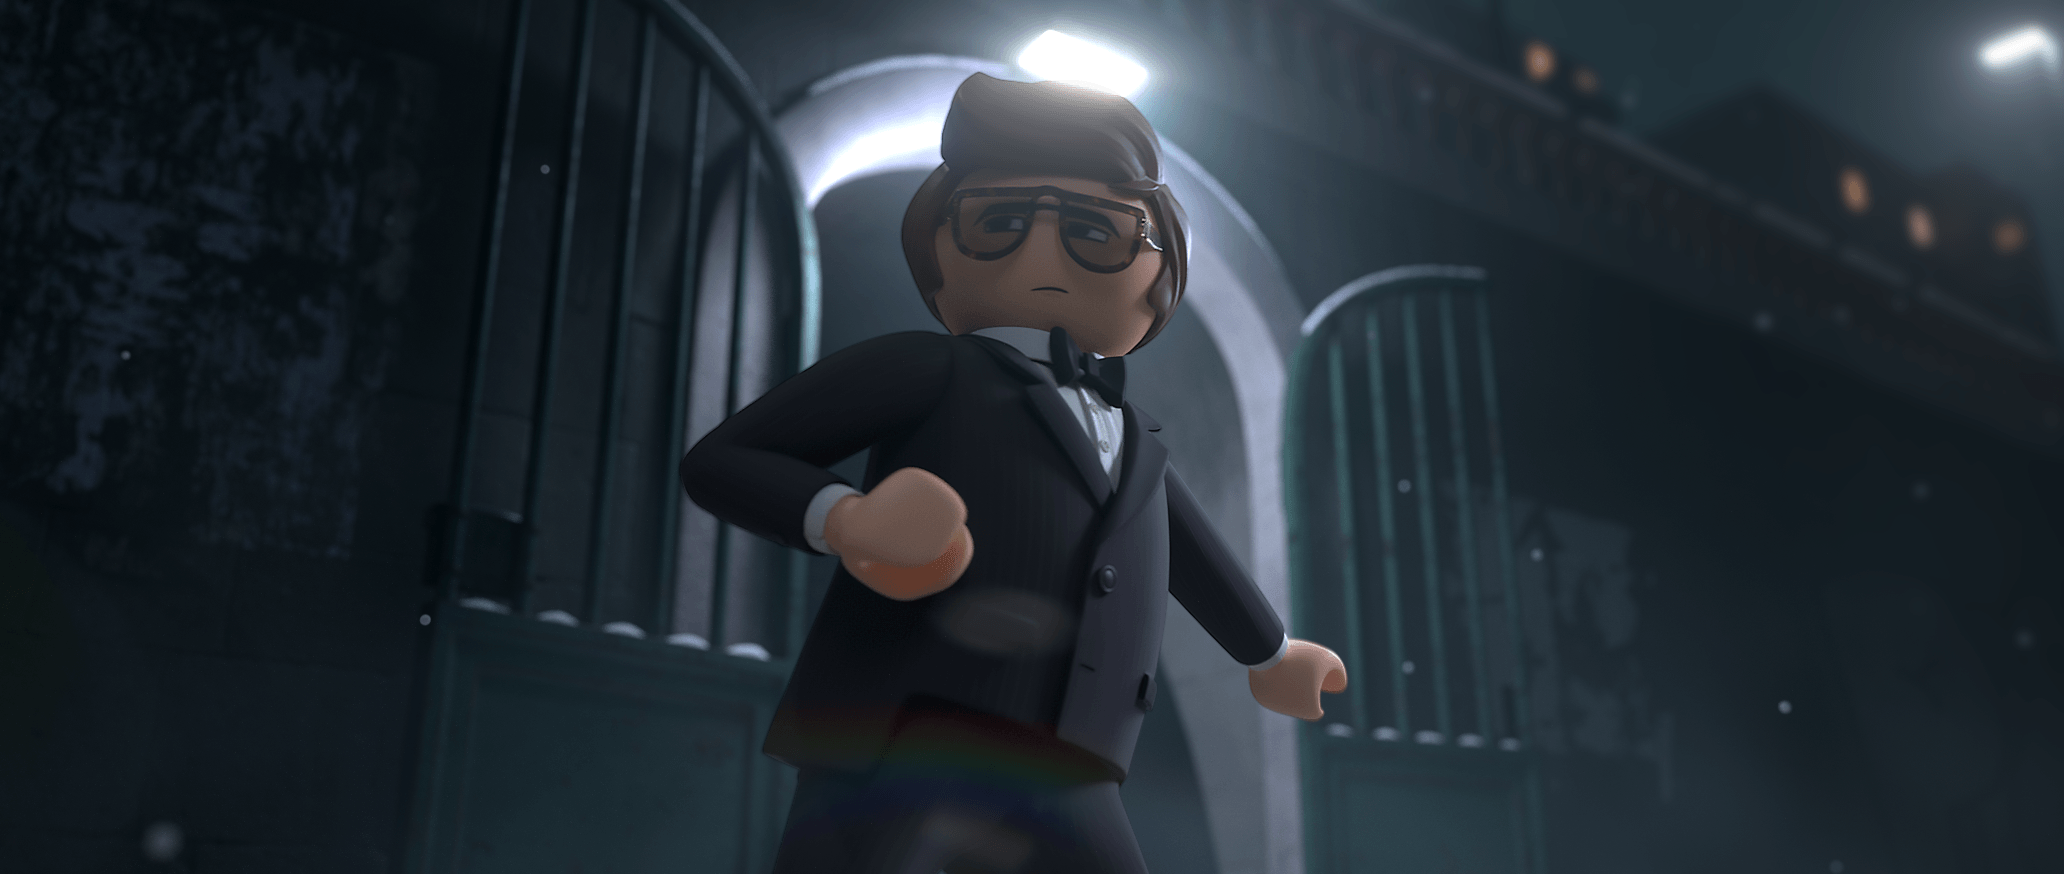 Playmobil: The Movie': Daniel Radcliffe on spy role and why